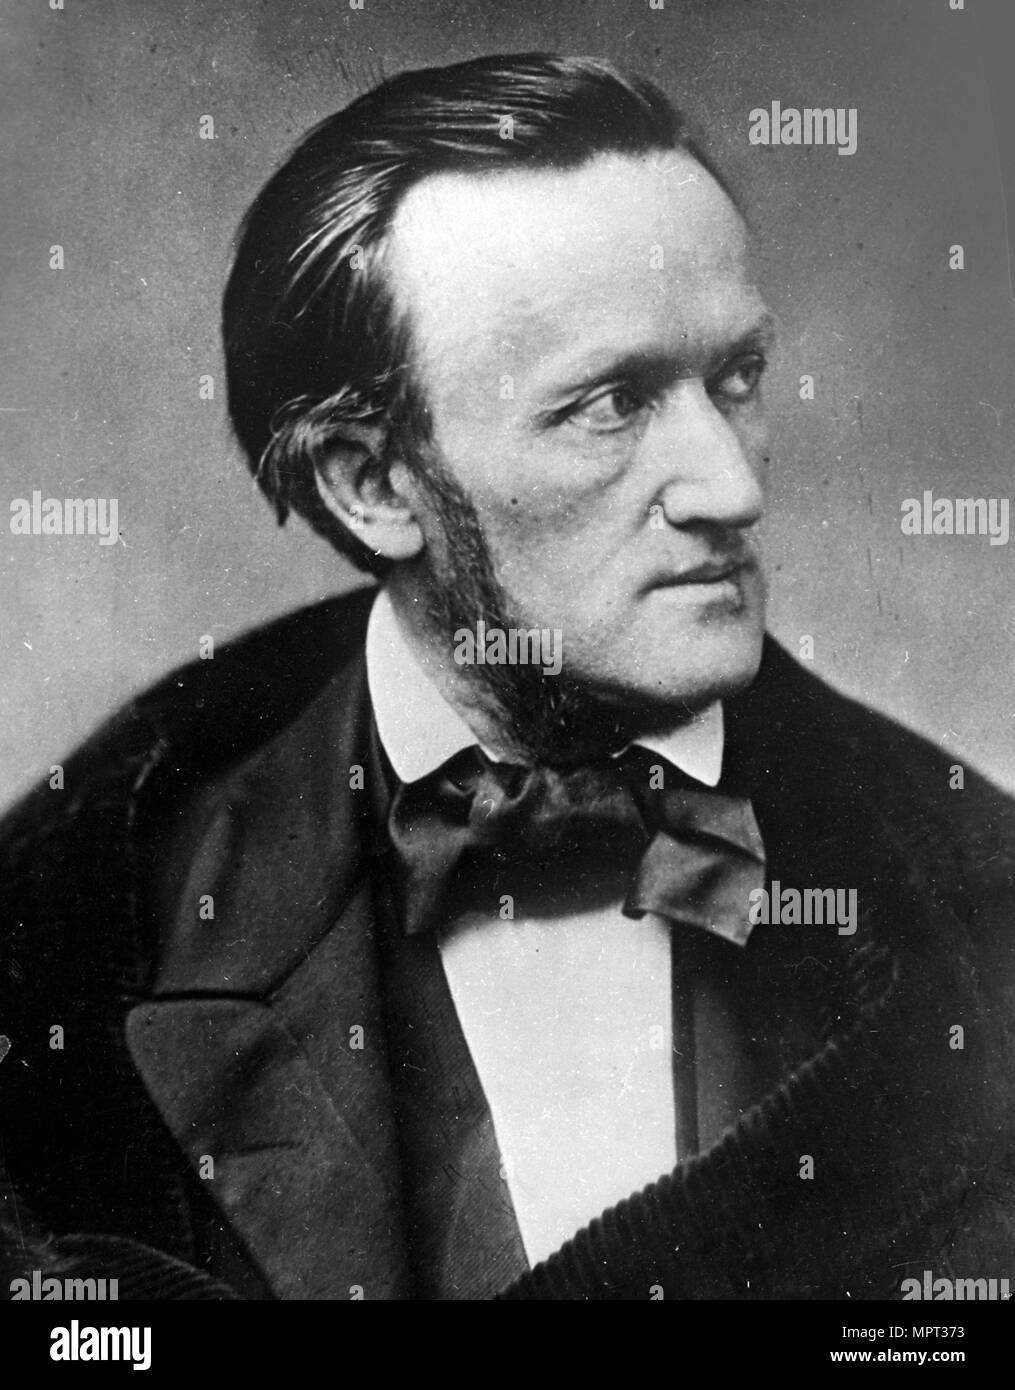 Portrait of the Composer Richard Wagner (1813-1883) in Paris, 1861. Stock Photo